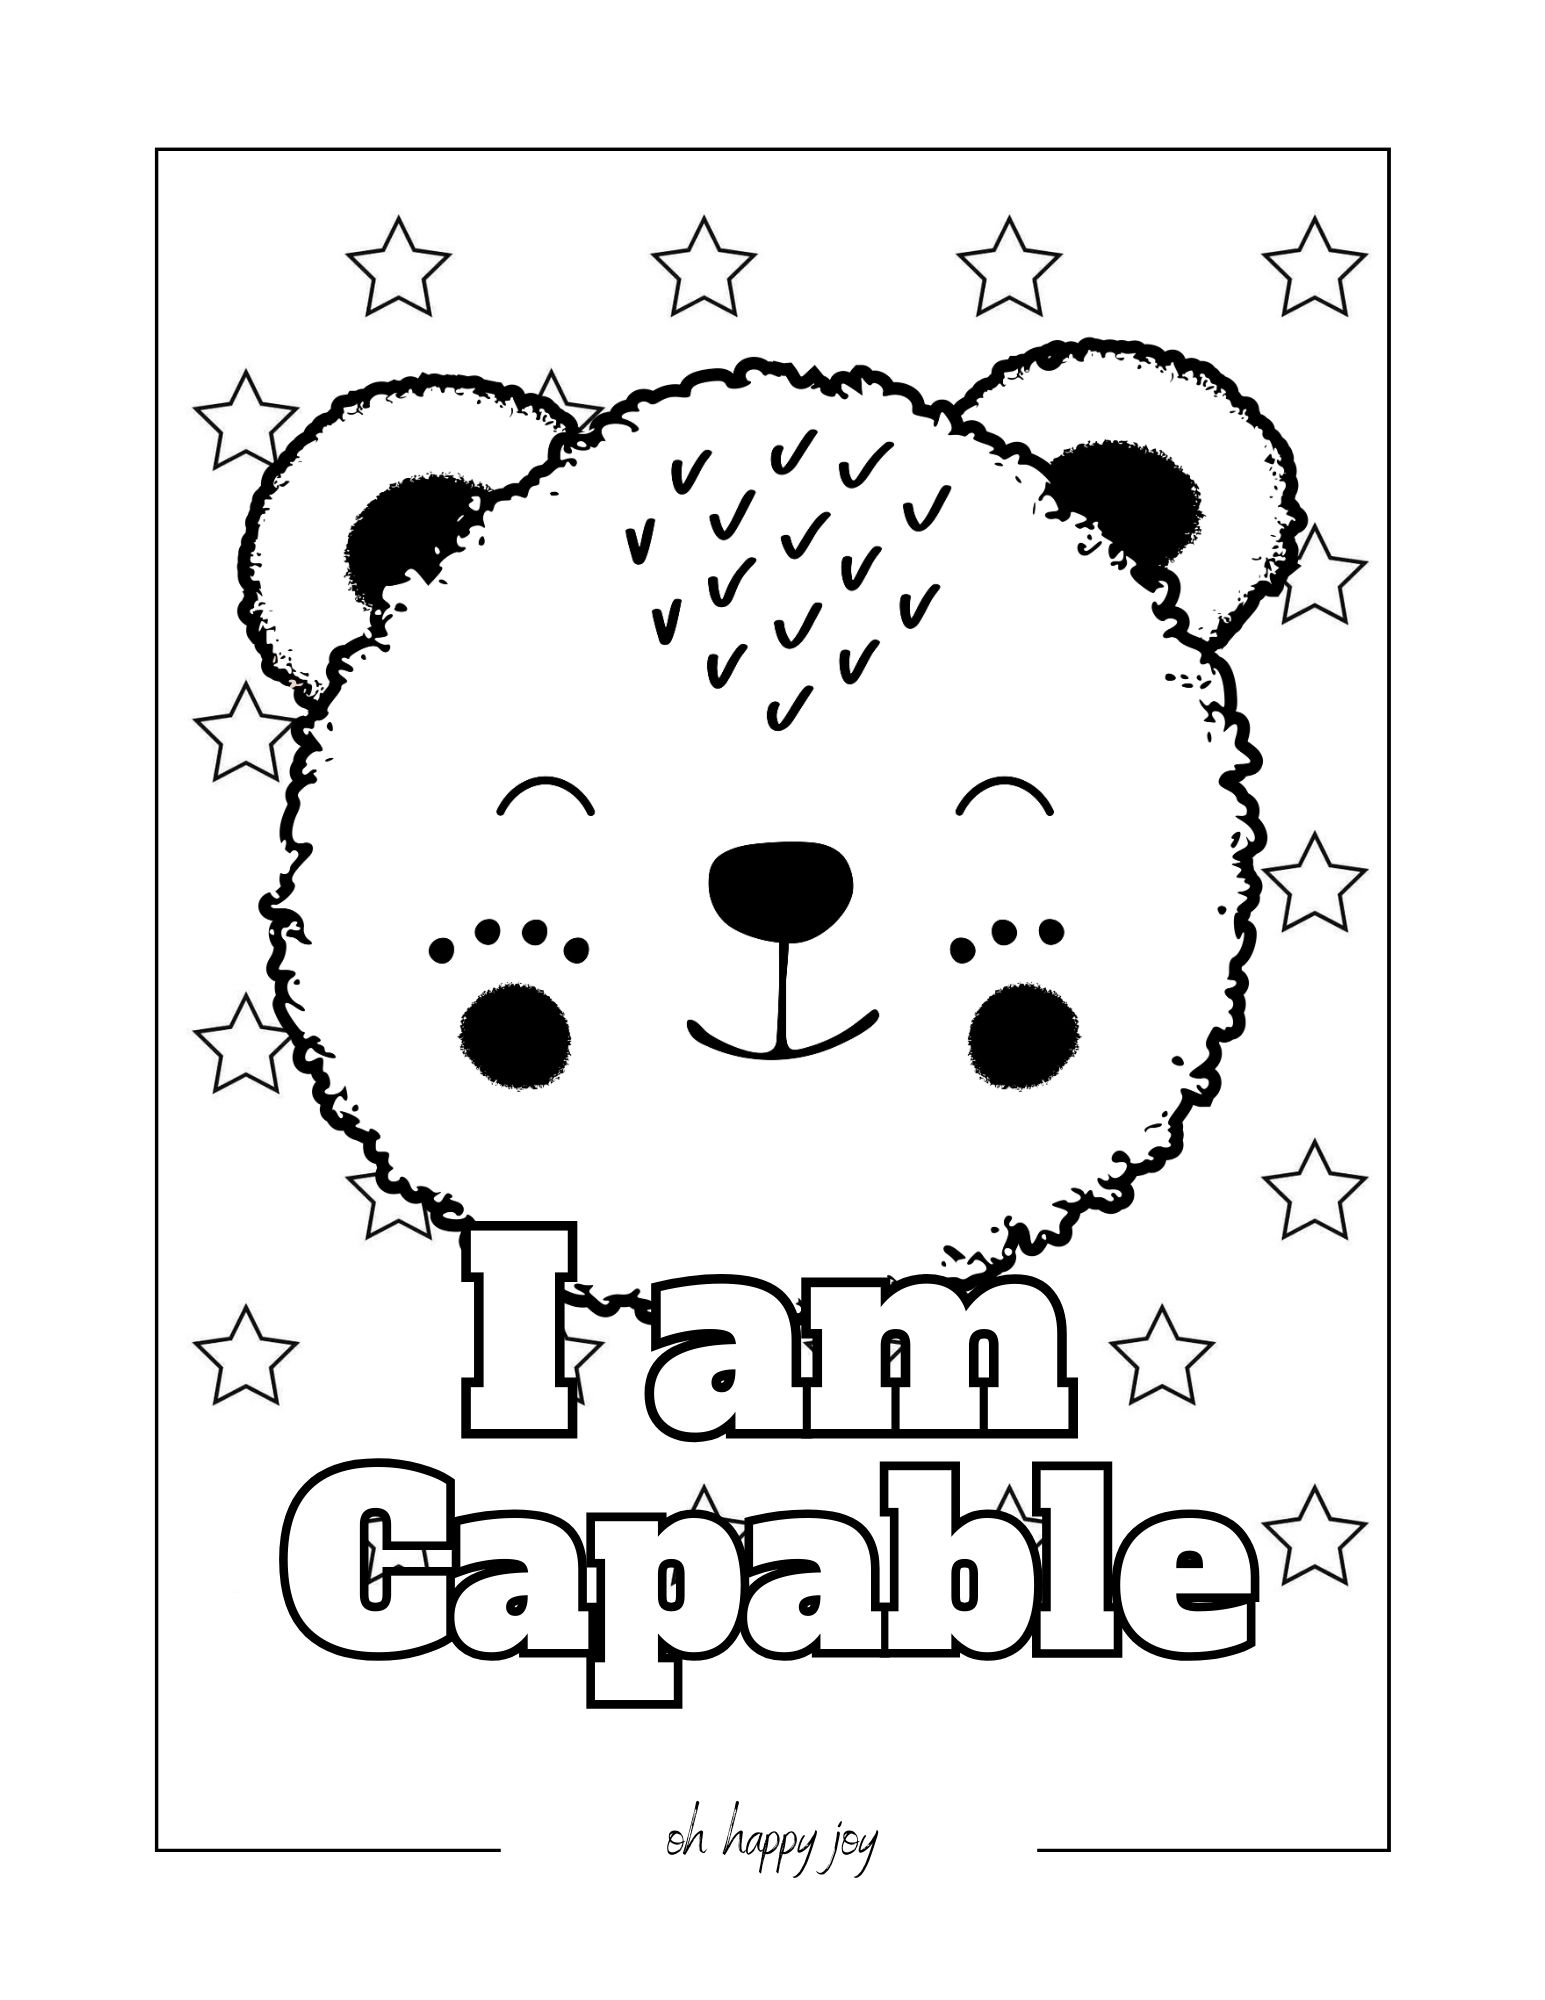 I am capable affirmation coloring page